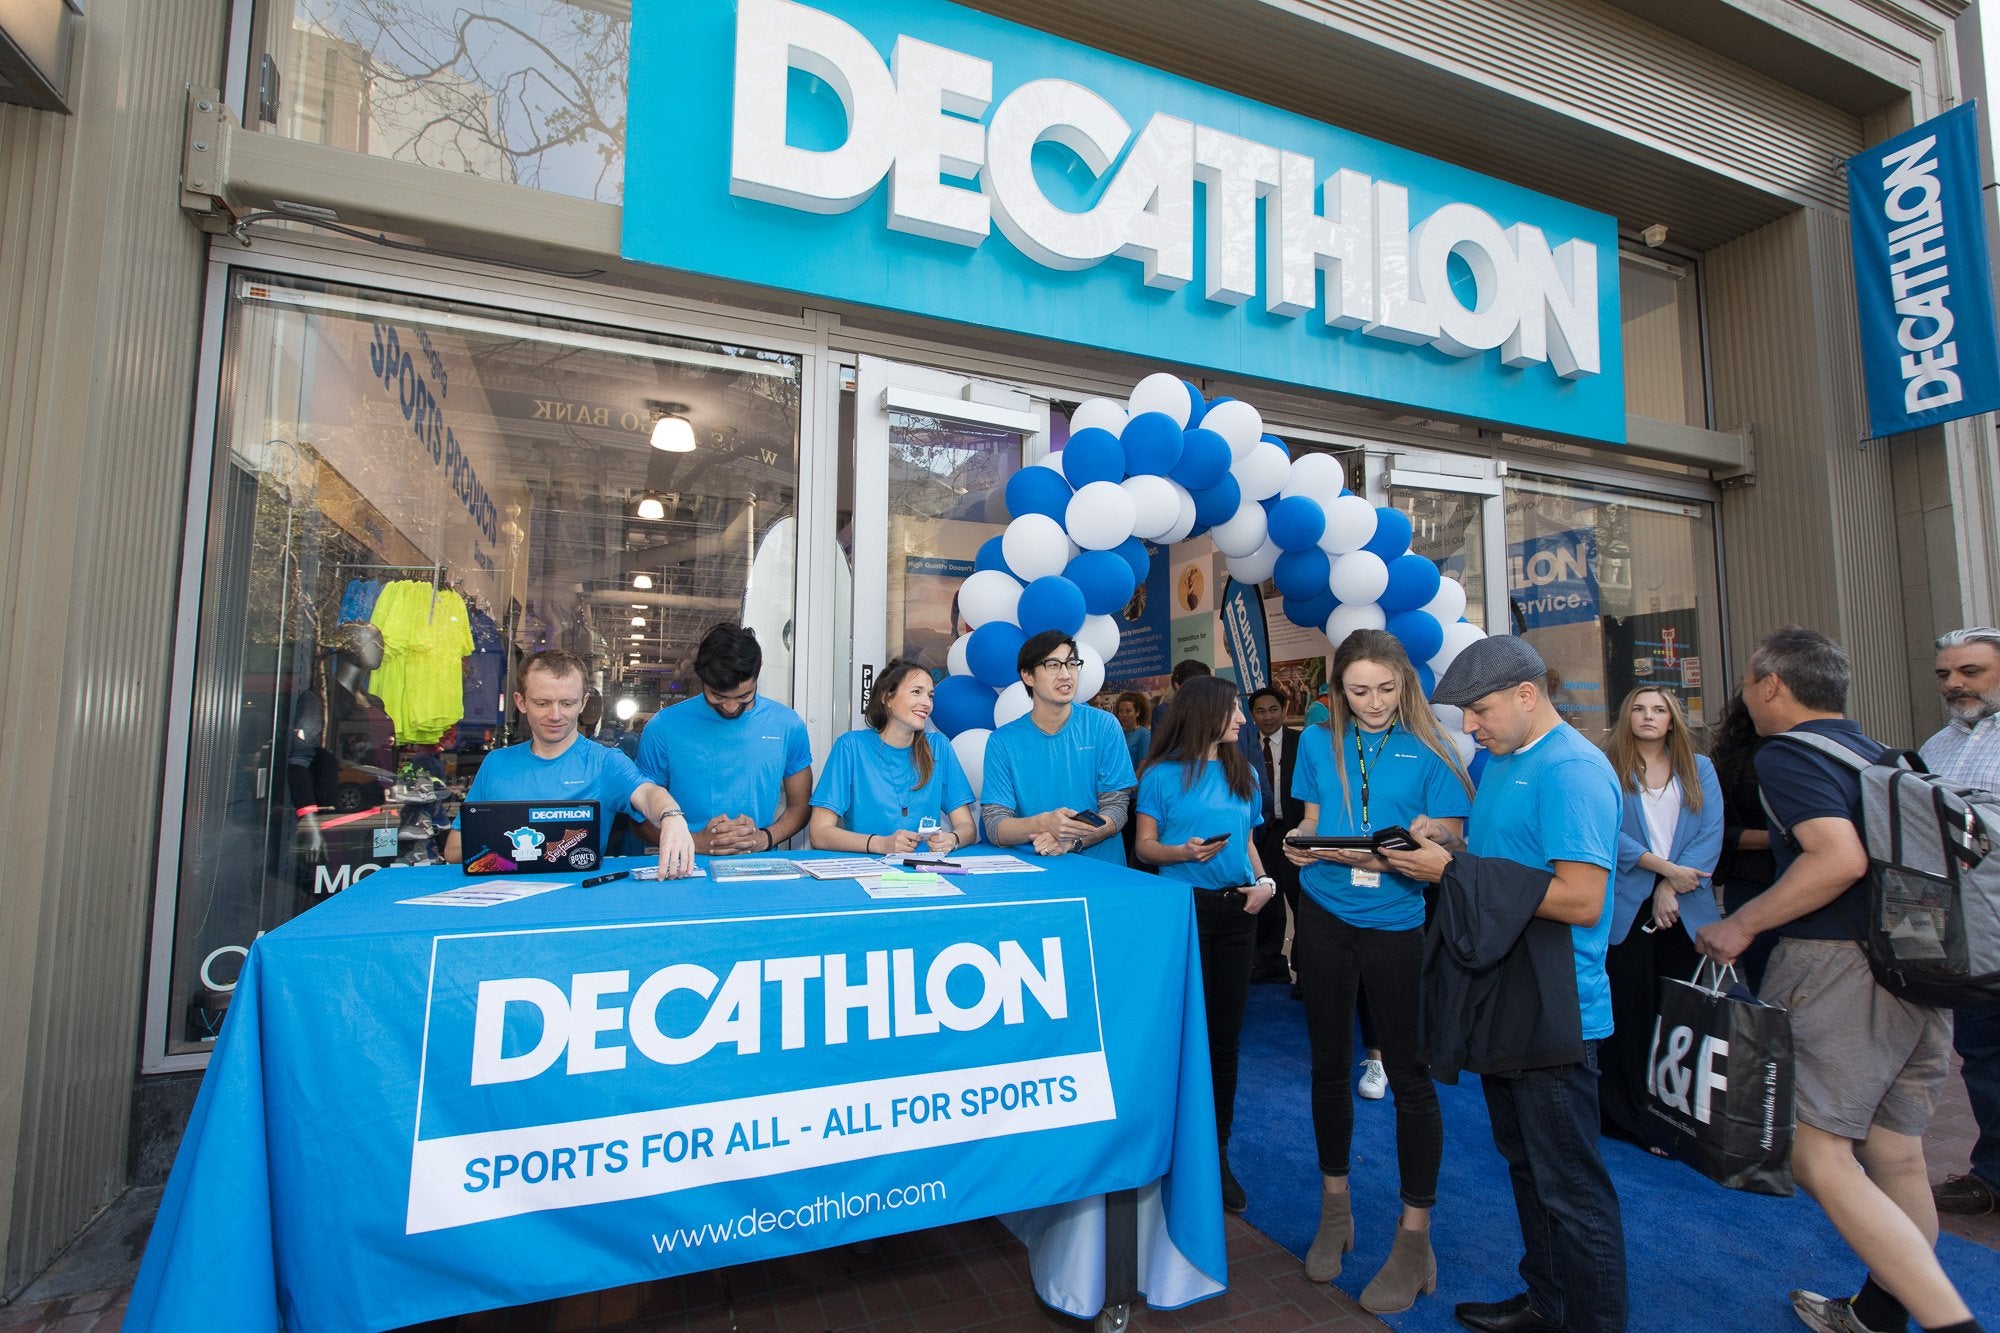 Affordable Sporting Gear Since 1976 - Our Story - Decathlon